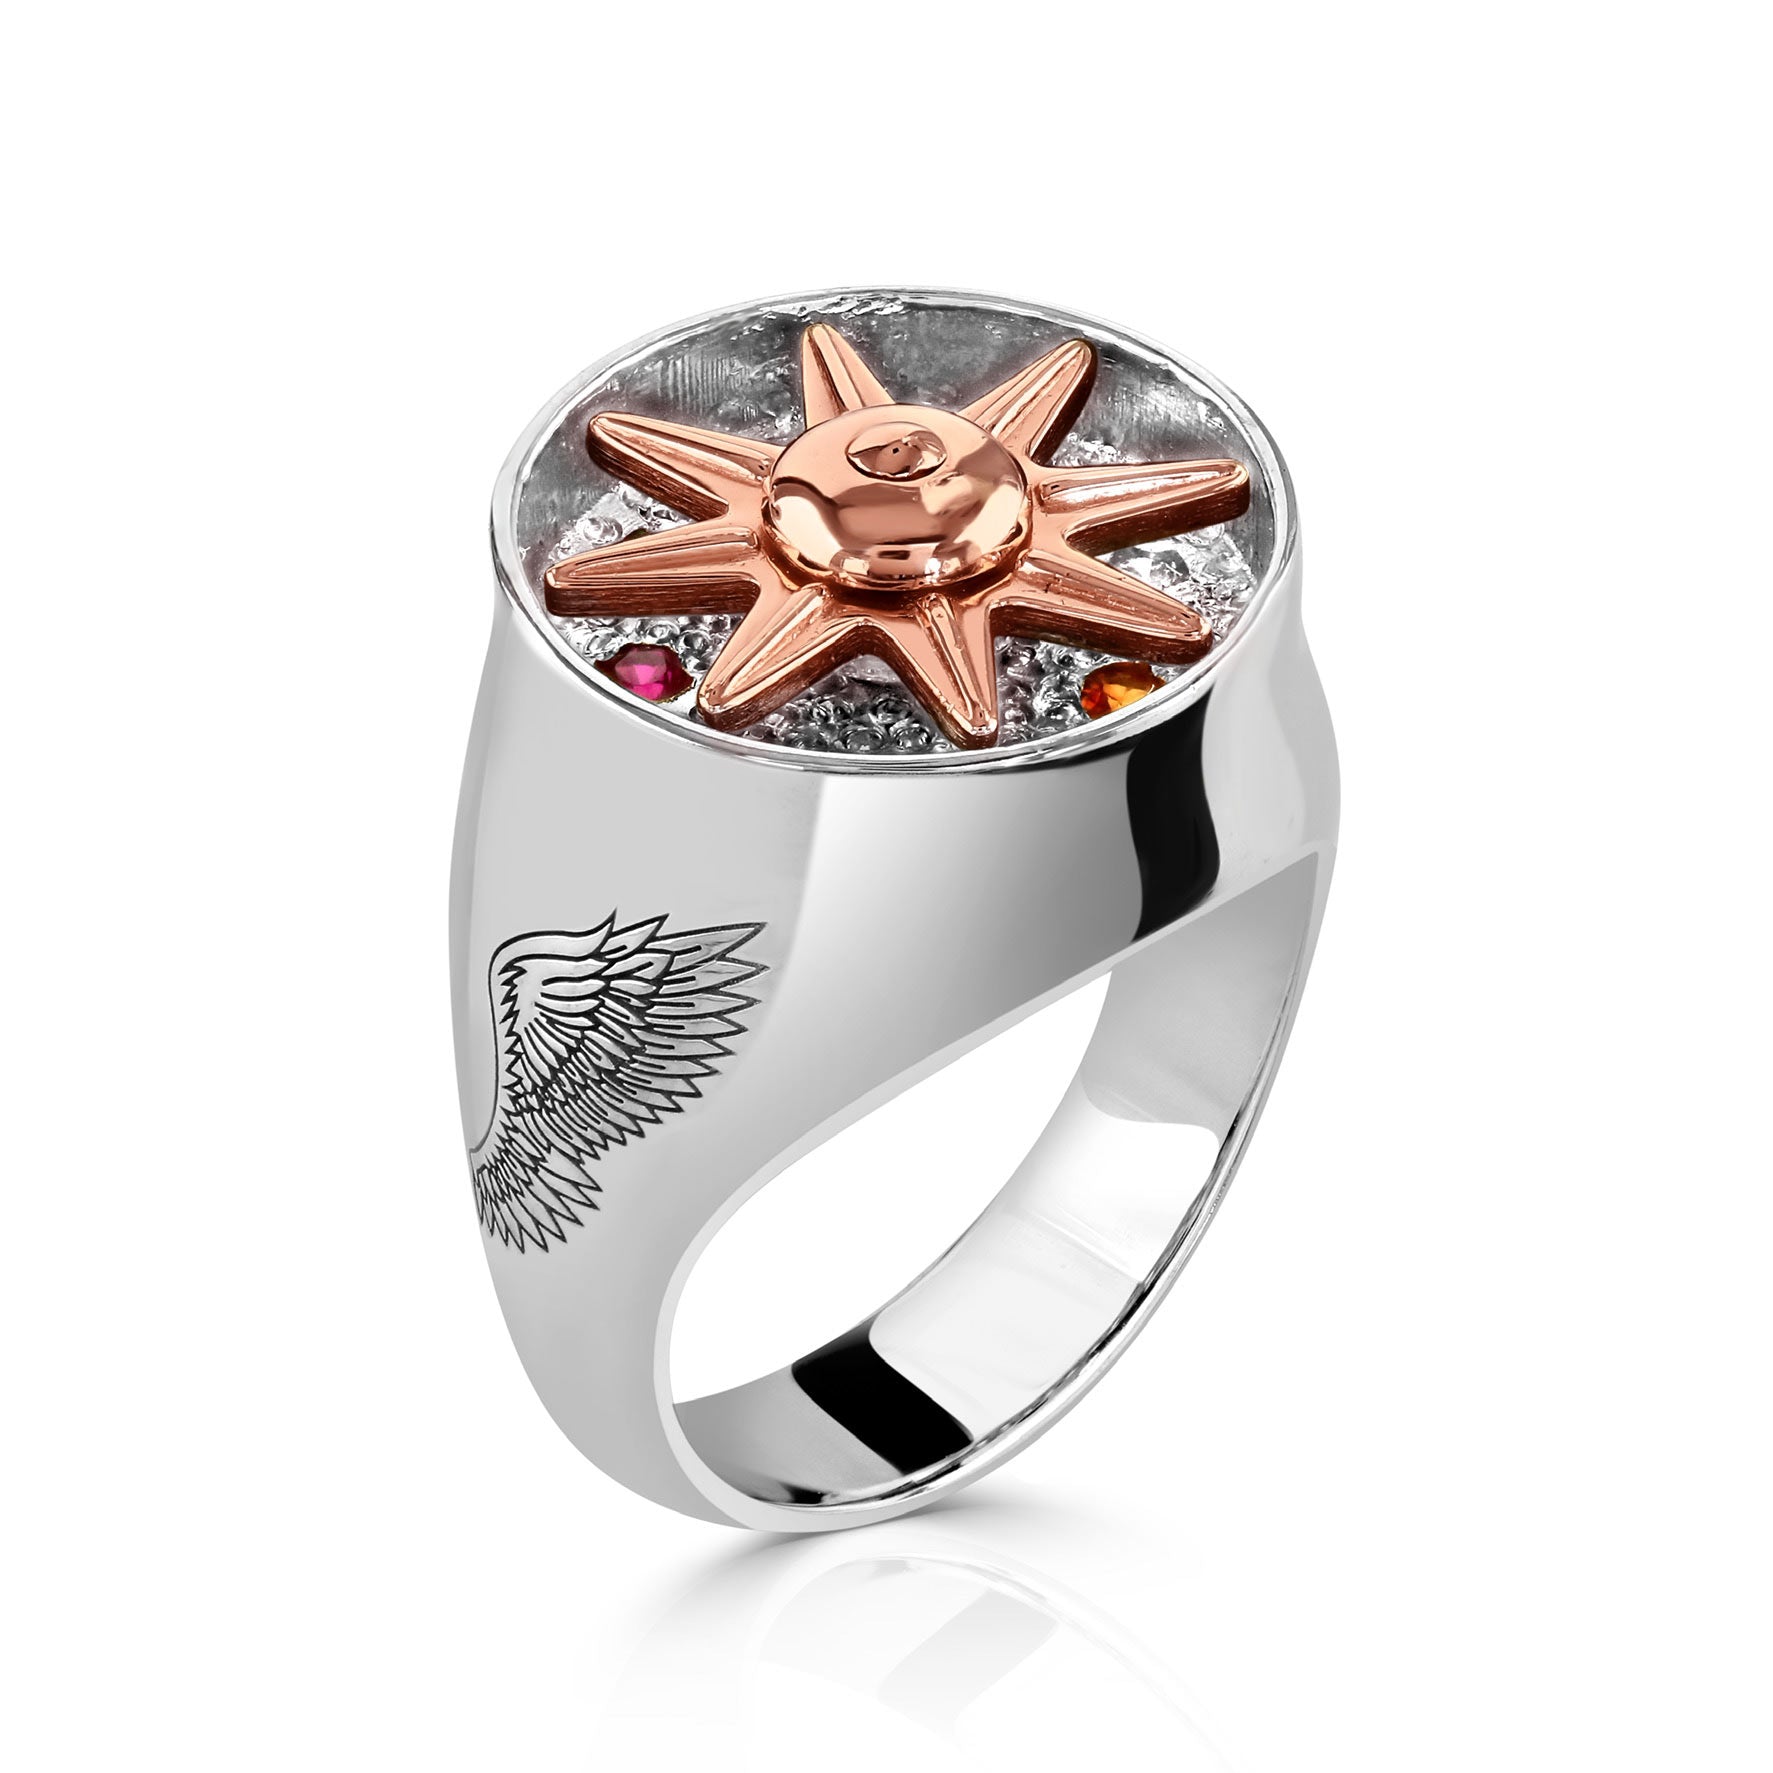 18ct gold Two-Tone Celestial Star ring